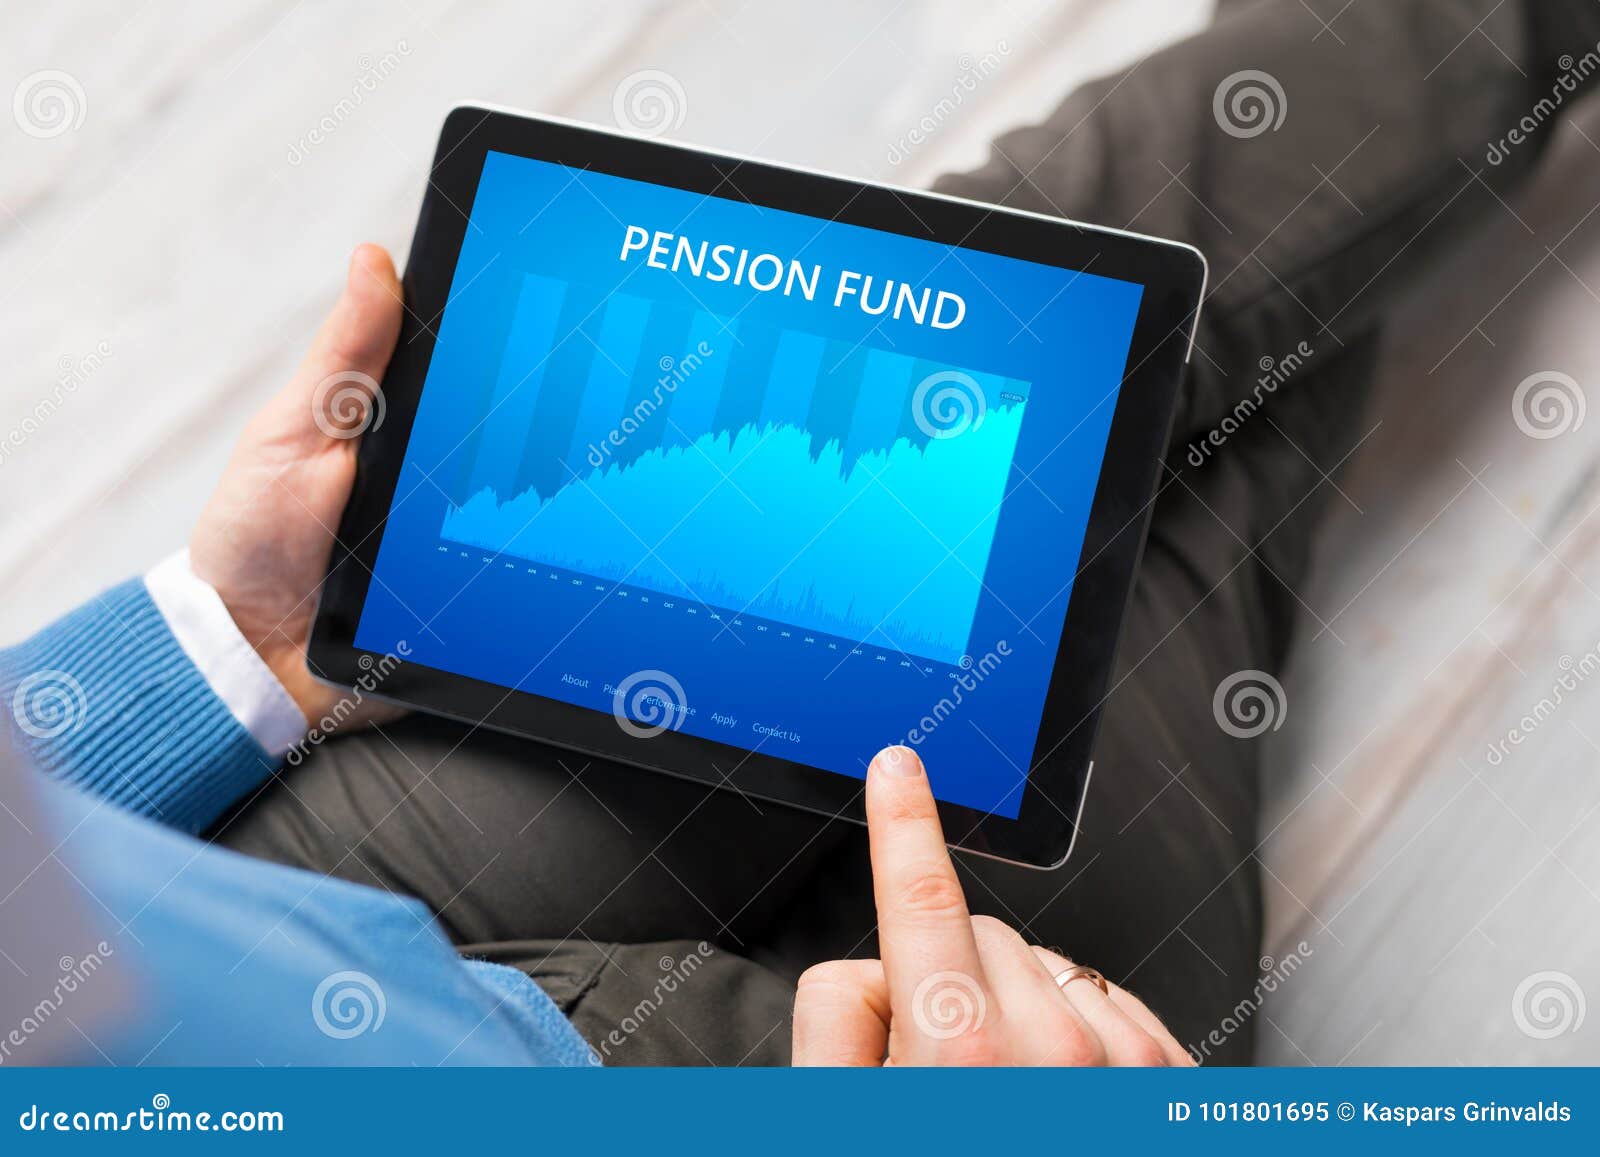 man looking at pension fund performance graph on tablet computer.